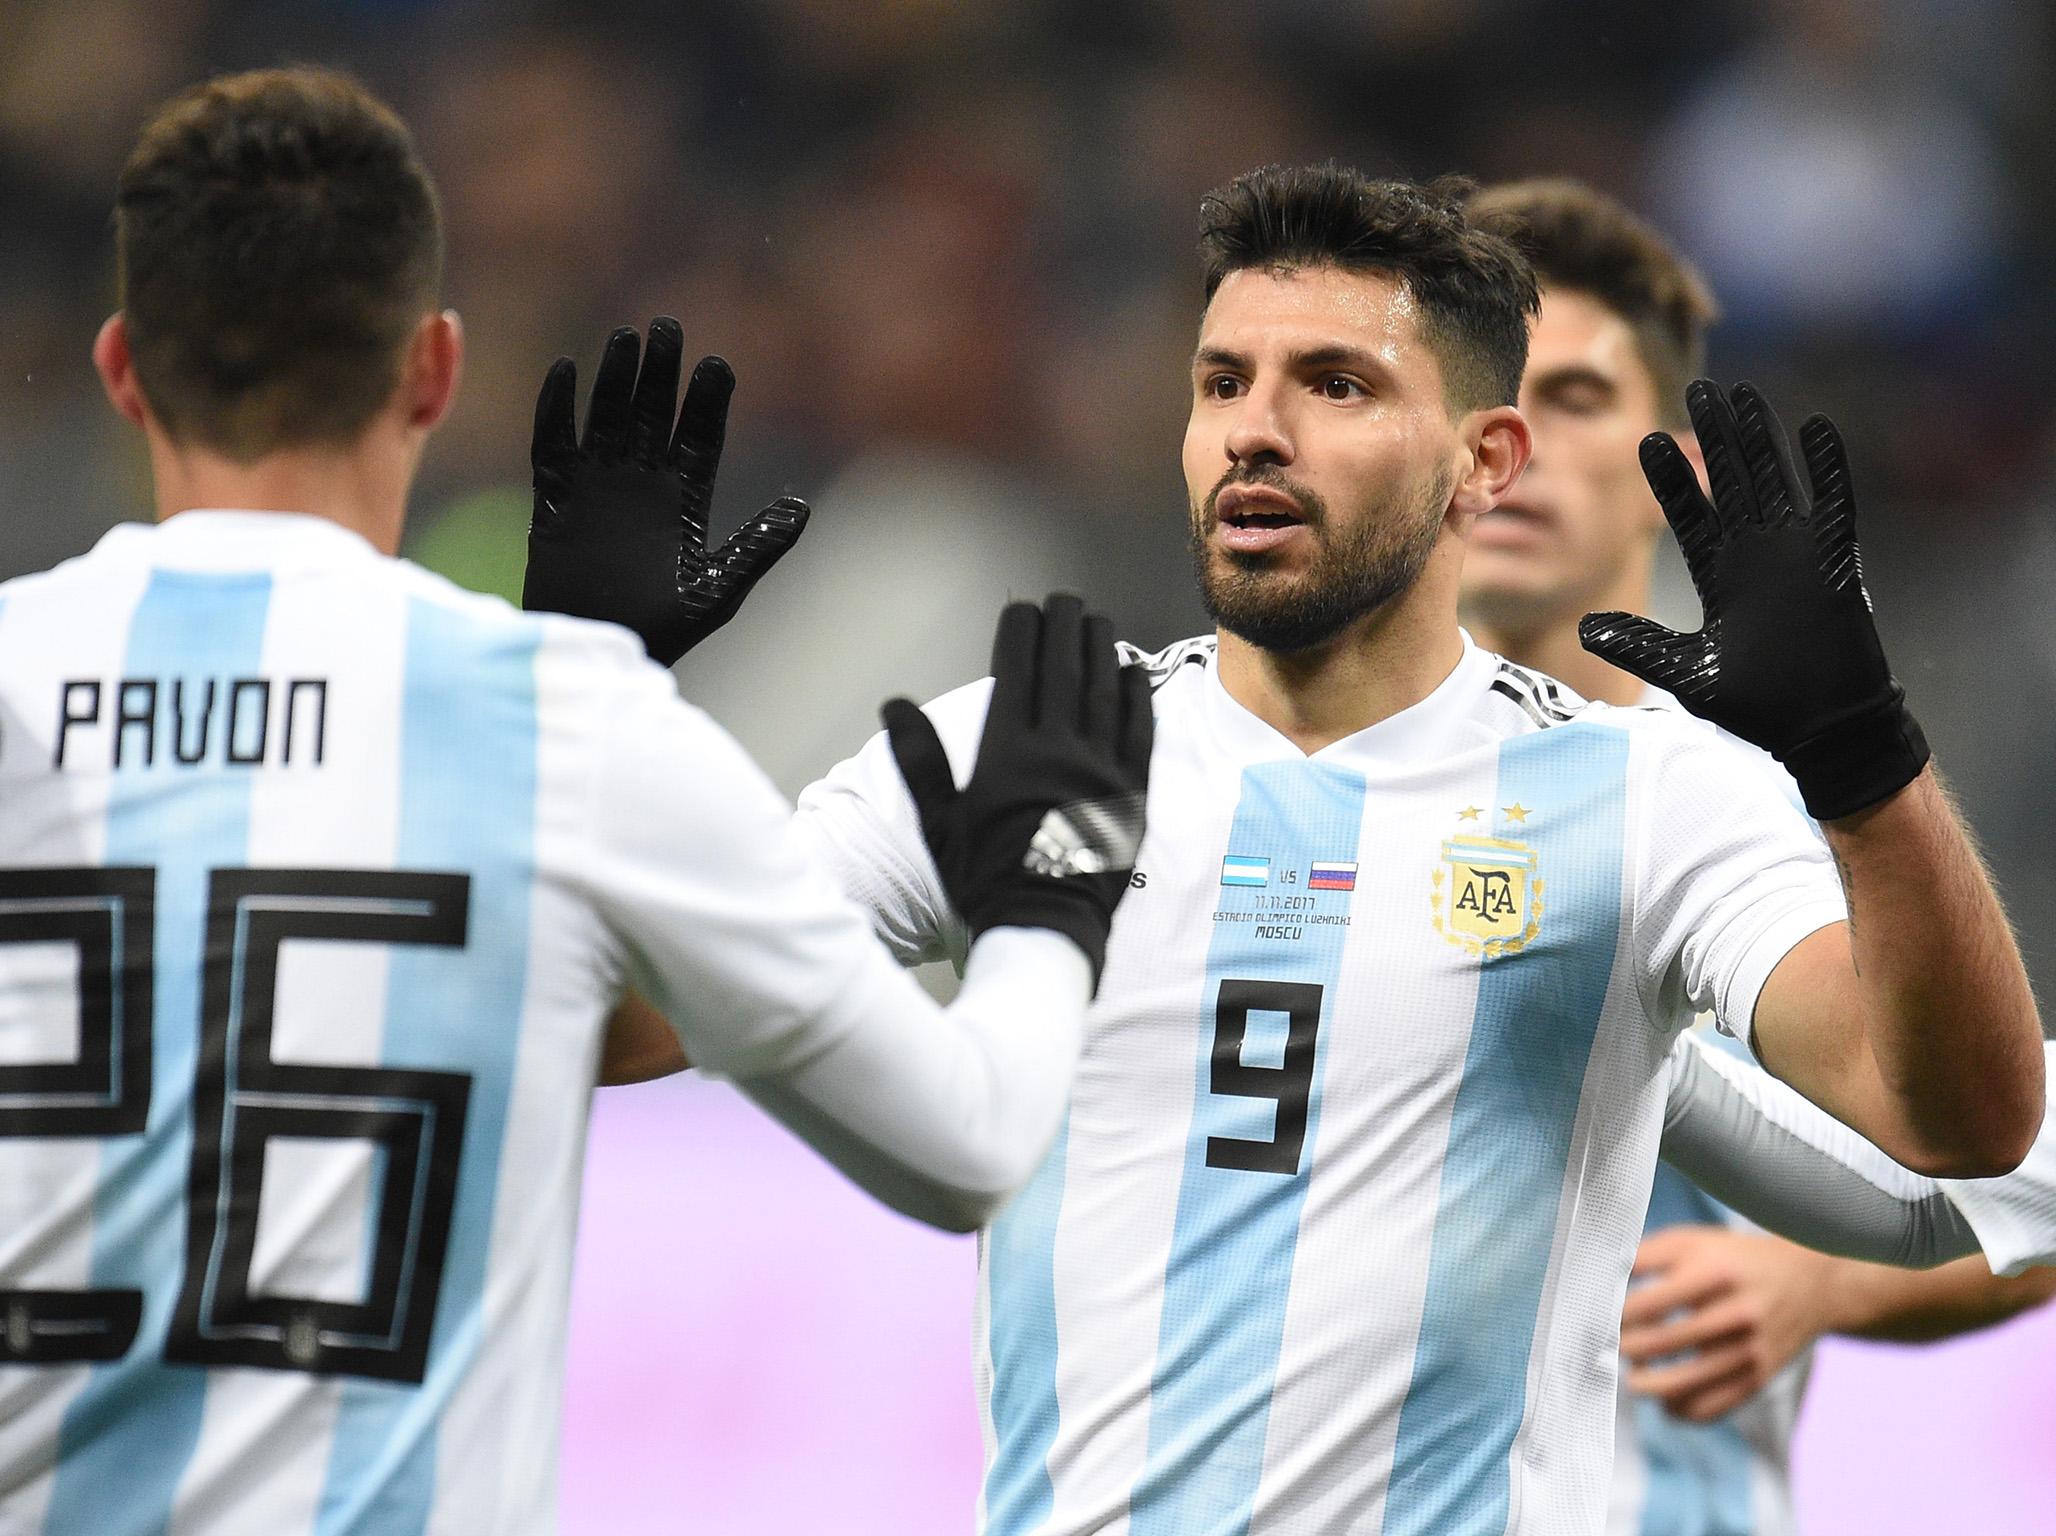 Sergio Aguero scored for Argentina in their defeat by Nigeria